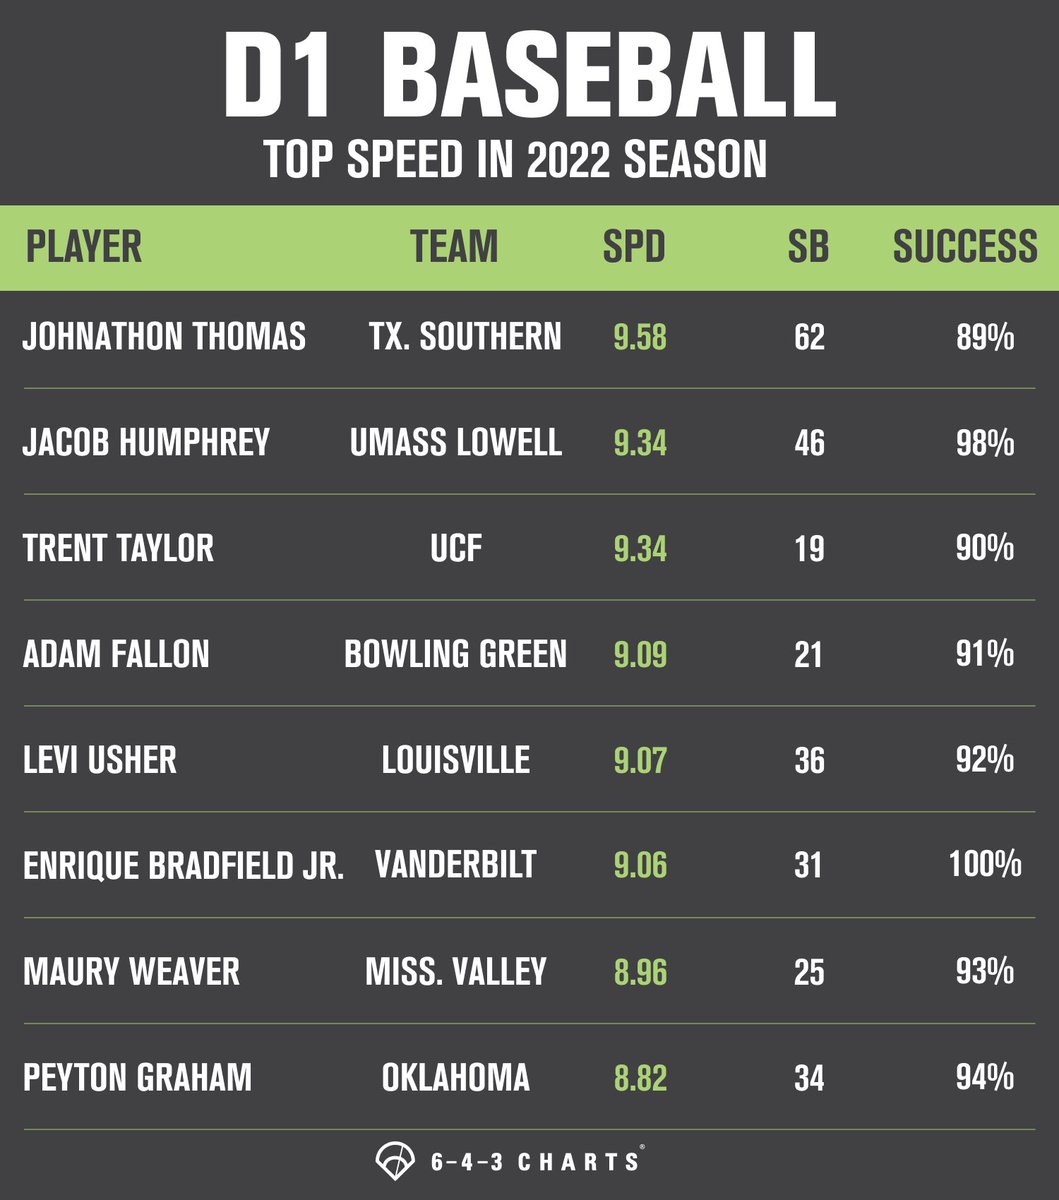 Faster than the Fastest 💨 These @d1baseball players were the best speed in 2022. Topping the ranks is @TXSOBASEBALL star @tudatime Johnathon Thomas with a 9.58 Speed Score and 62 stolen bases 🚀